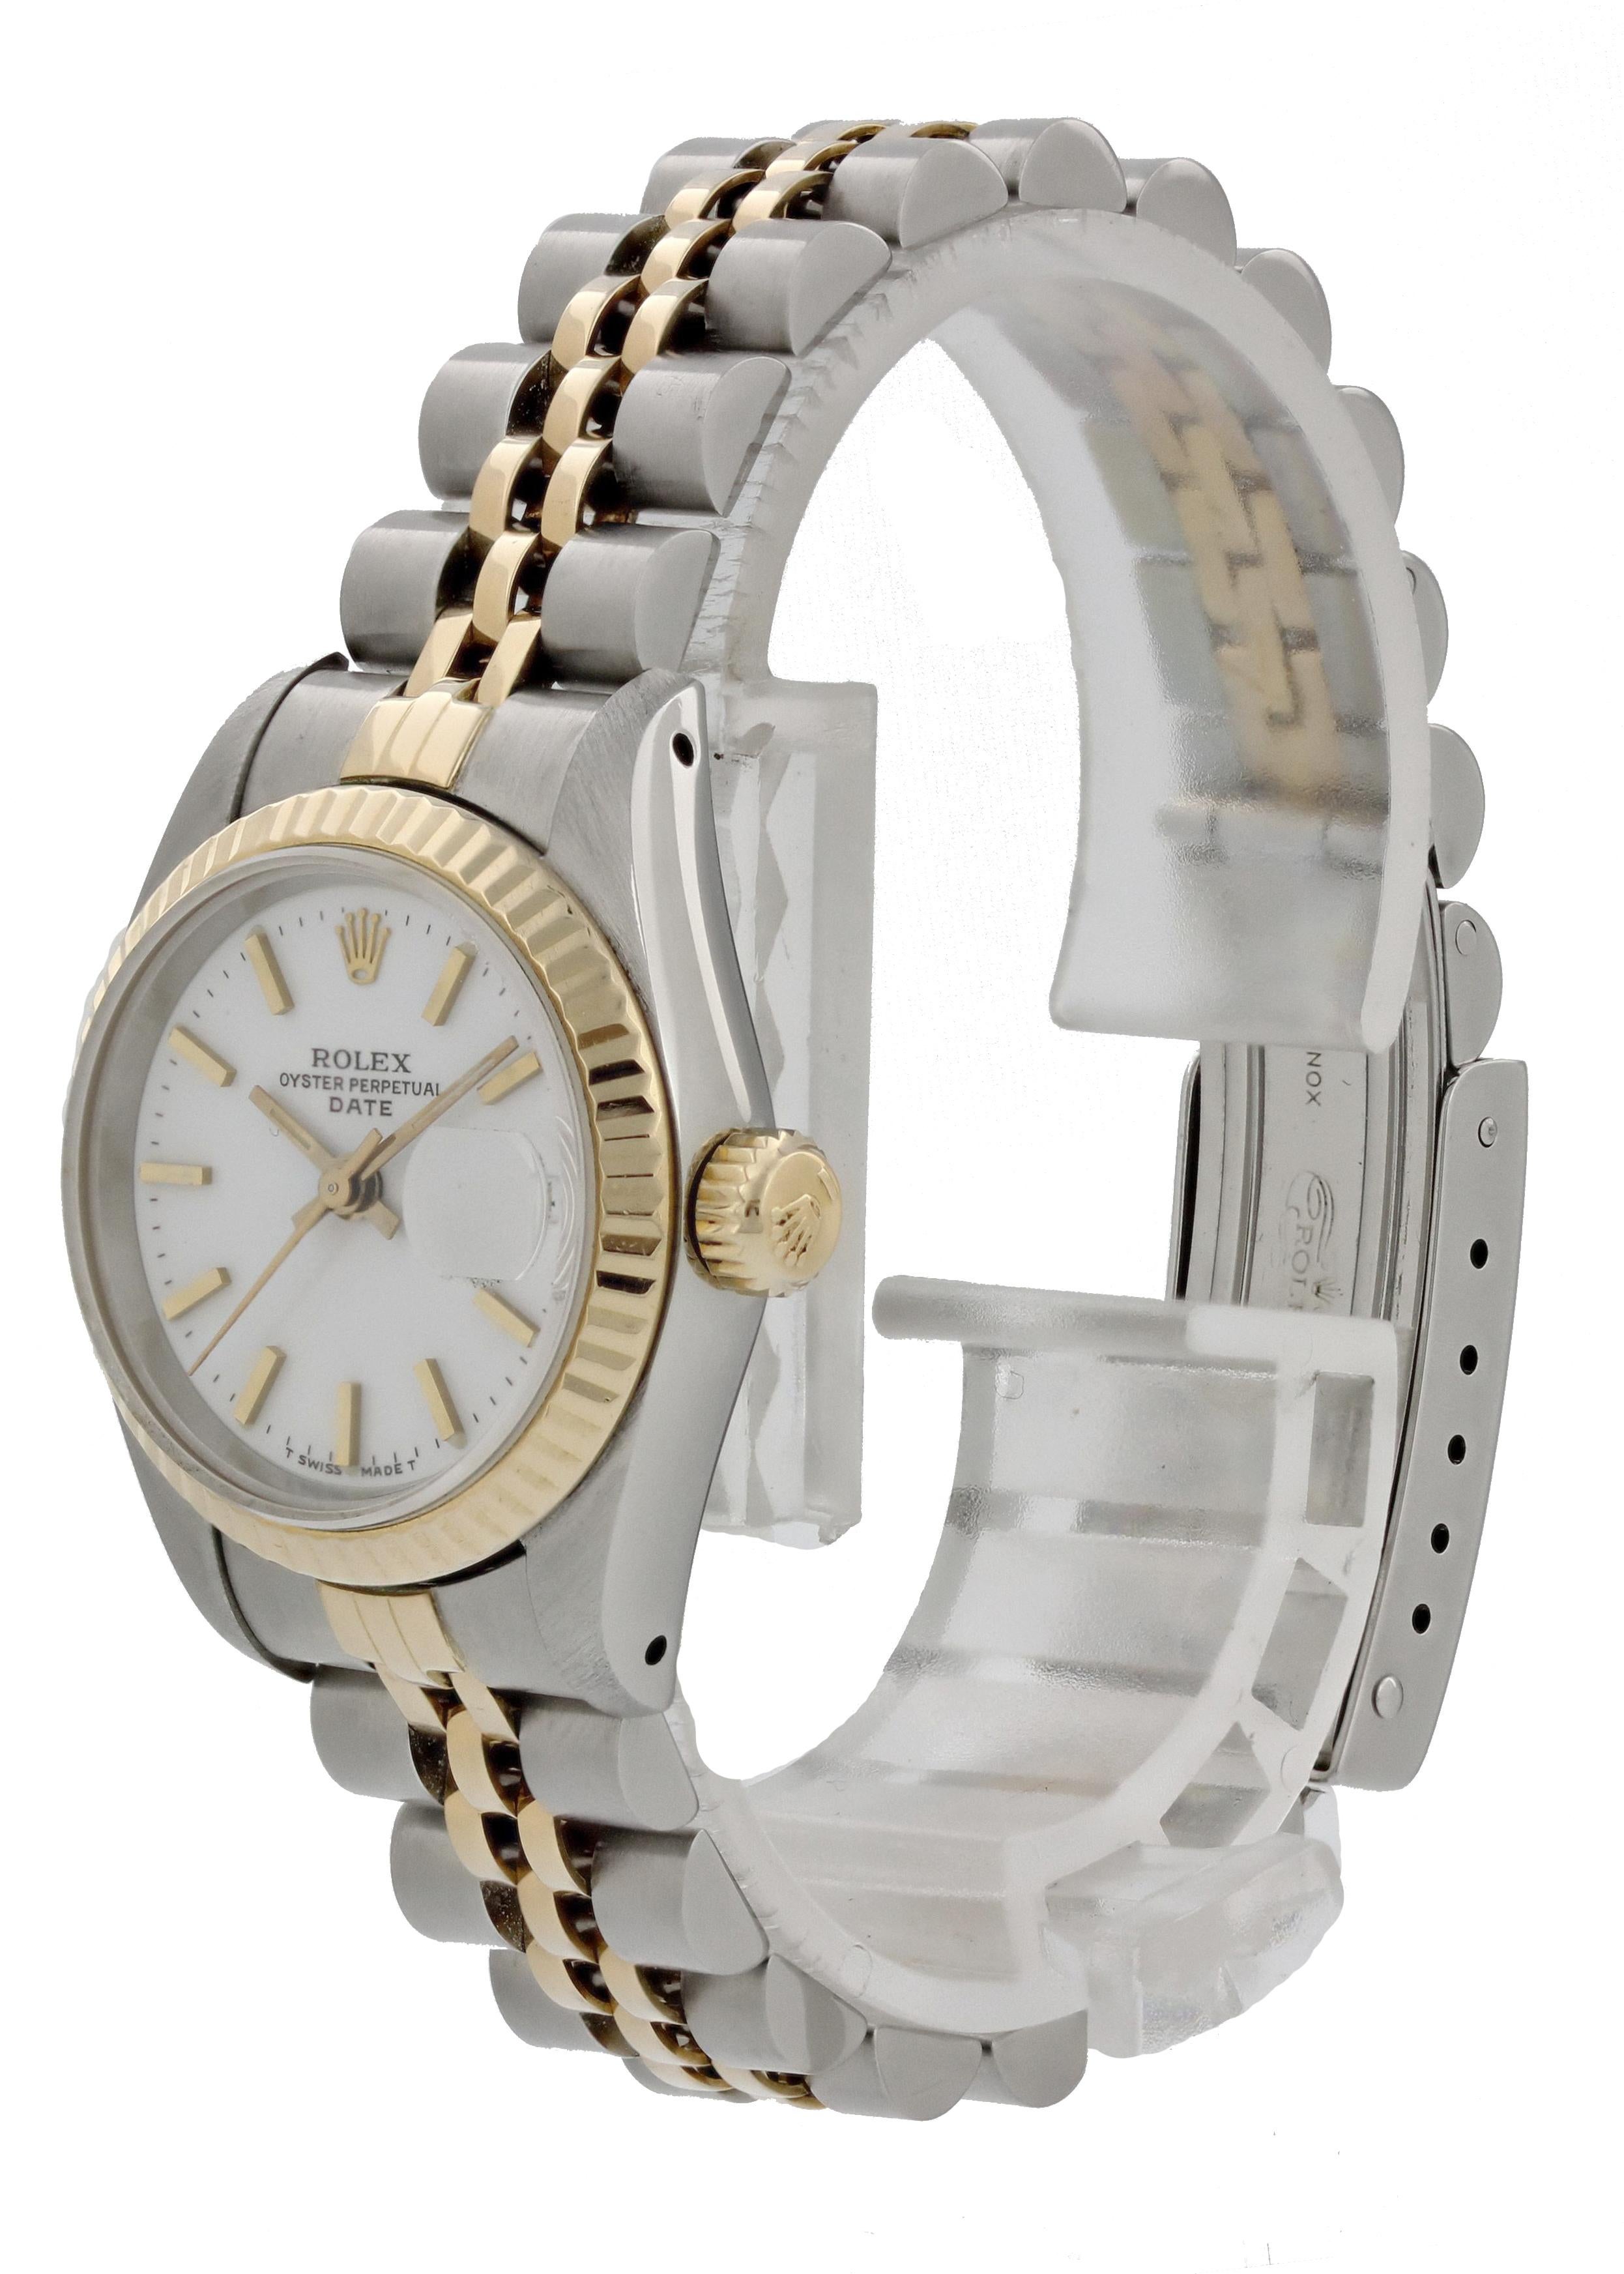 Rolex Datejust 69173 Ladies Watch. 
26mm Stainless Steel case. 
Yellow Gold Stationary bezel. 
White dial with Luminous gold hands and index hour markers. 
Minute markers on the outer dial. 
Date display at the 3 o'clock position. 
Stainless Steel